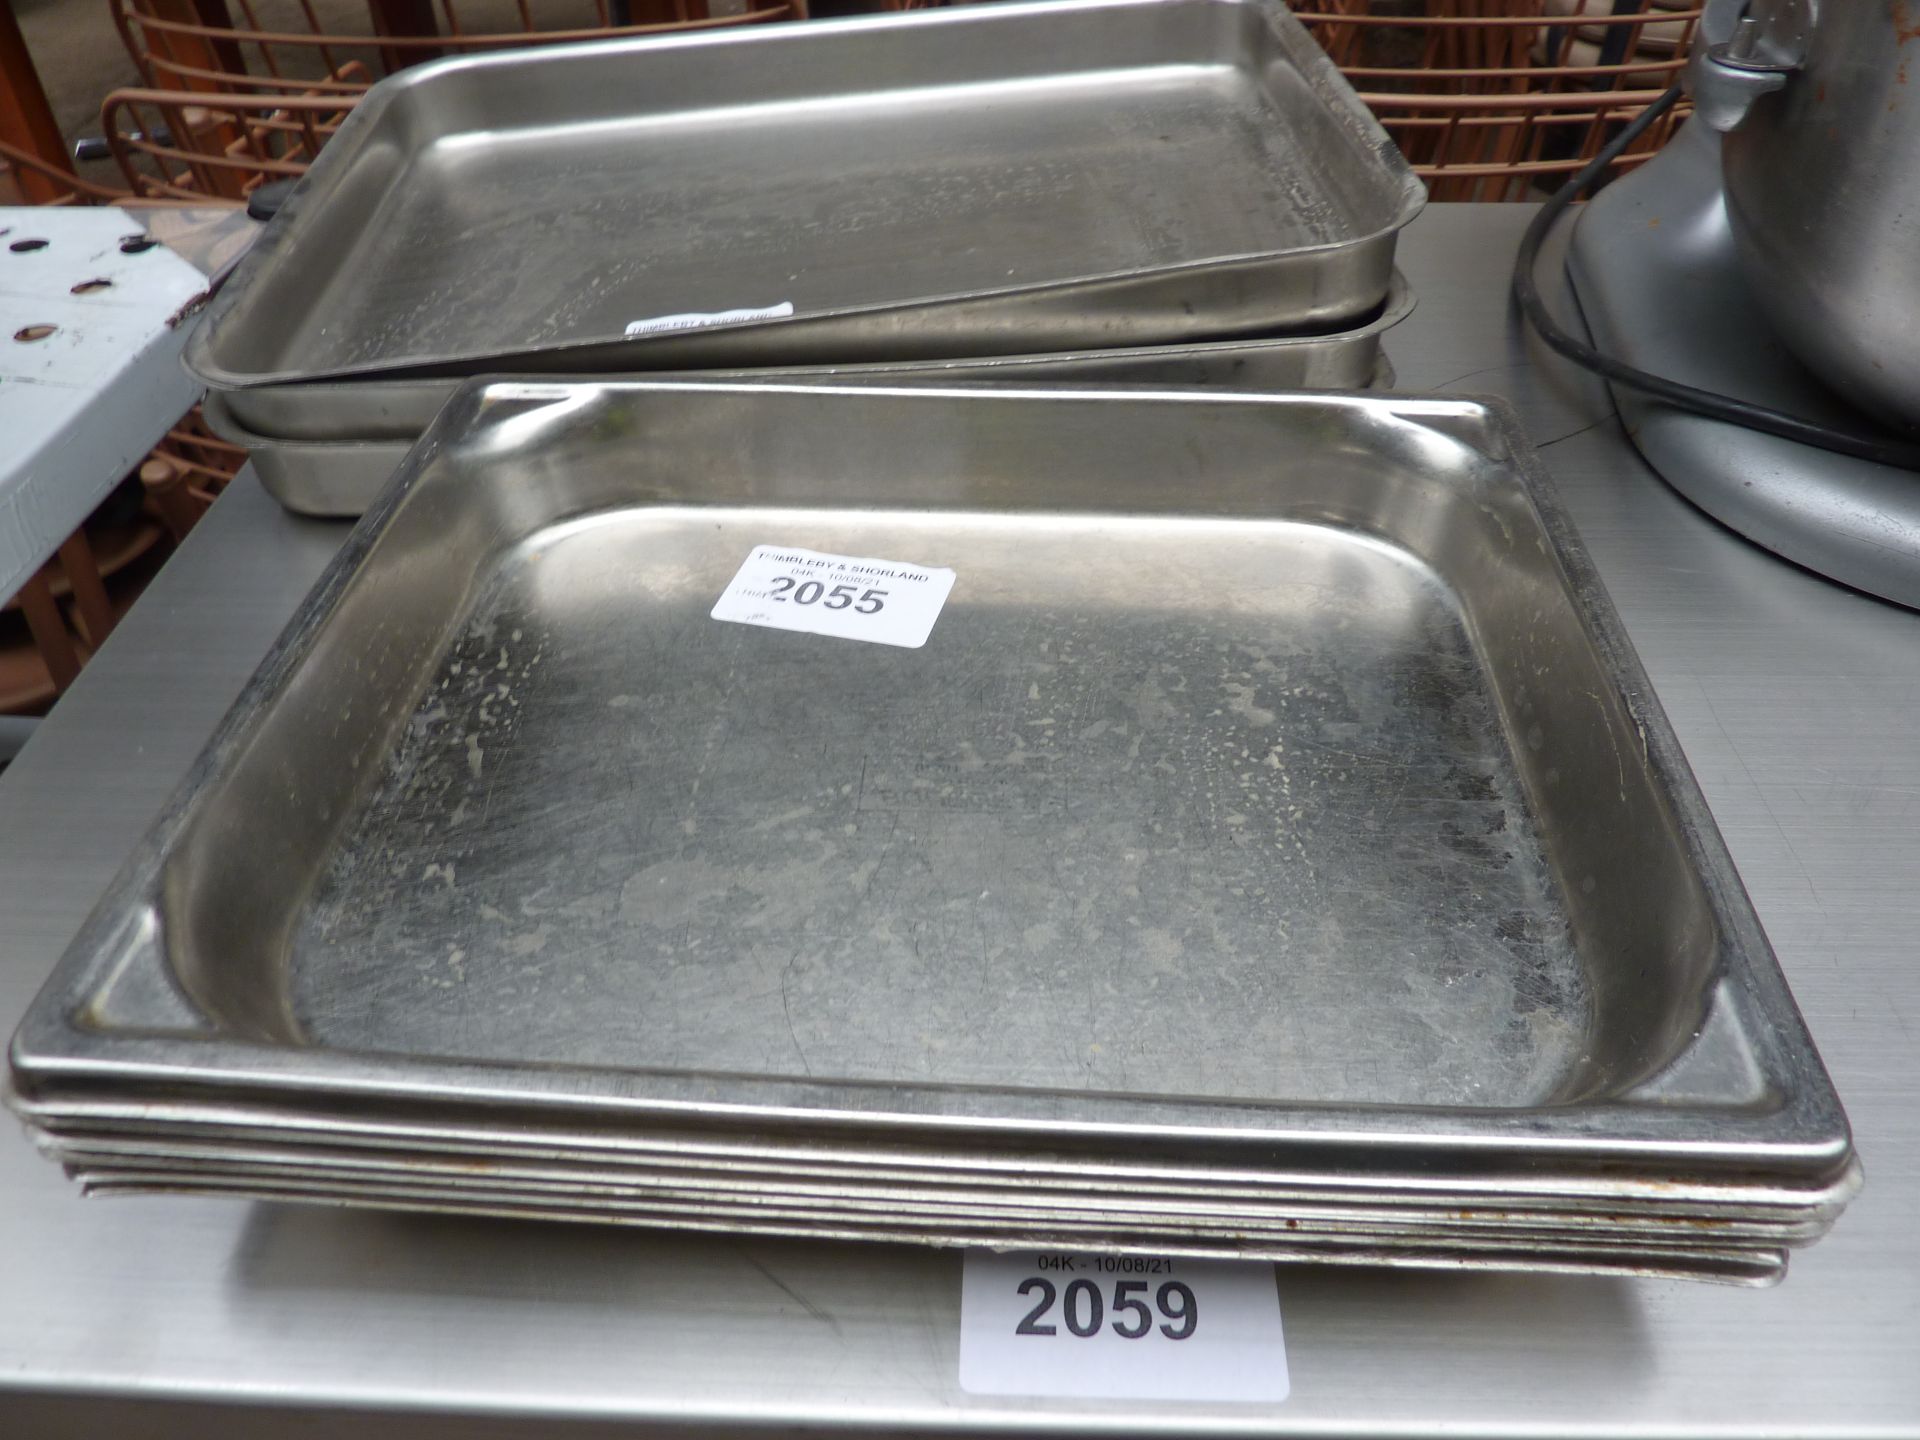 Six stainless steel baking trays